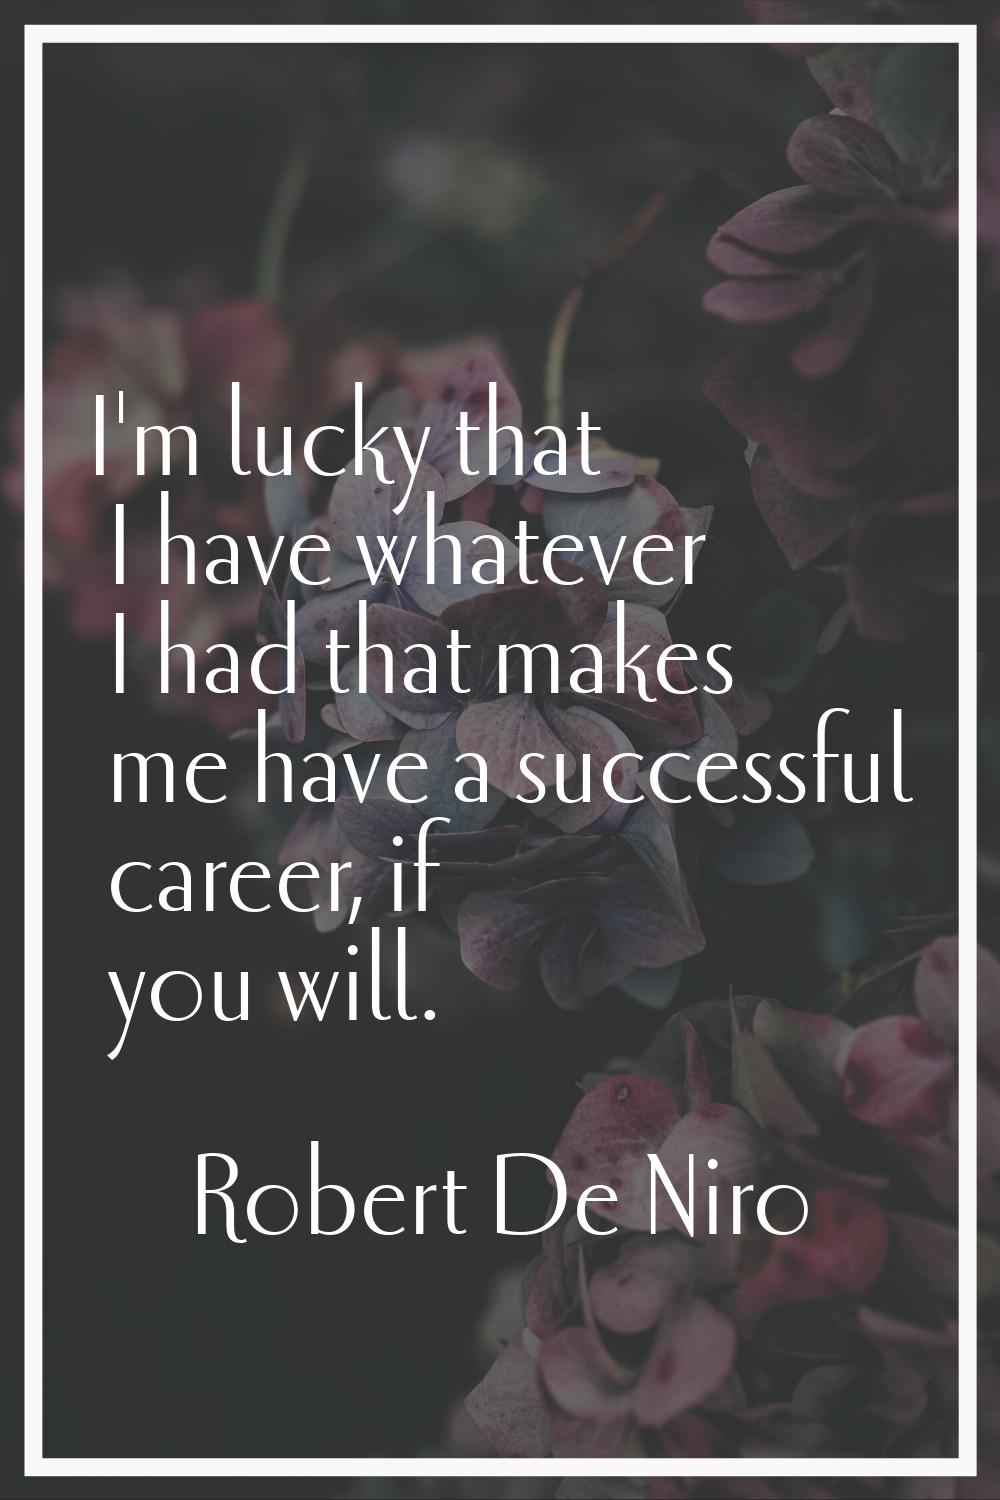 I'm lucky that I have whatever I had that makes me have a successful career, if you will.